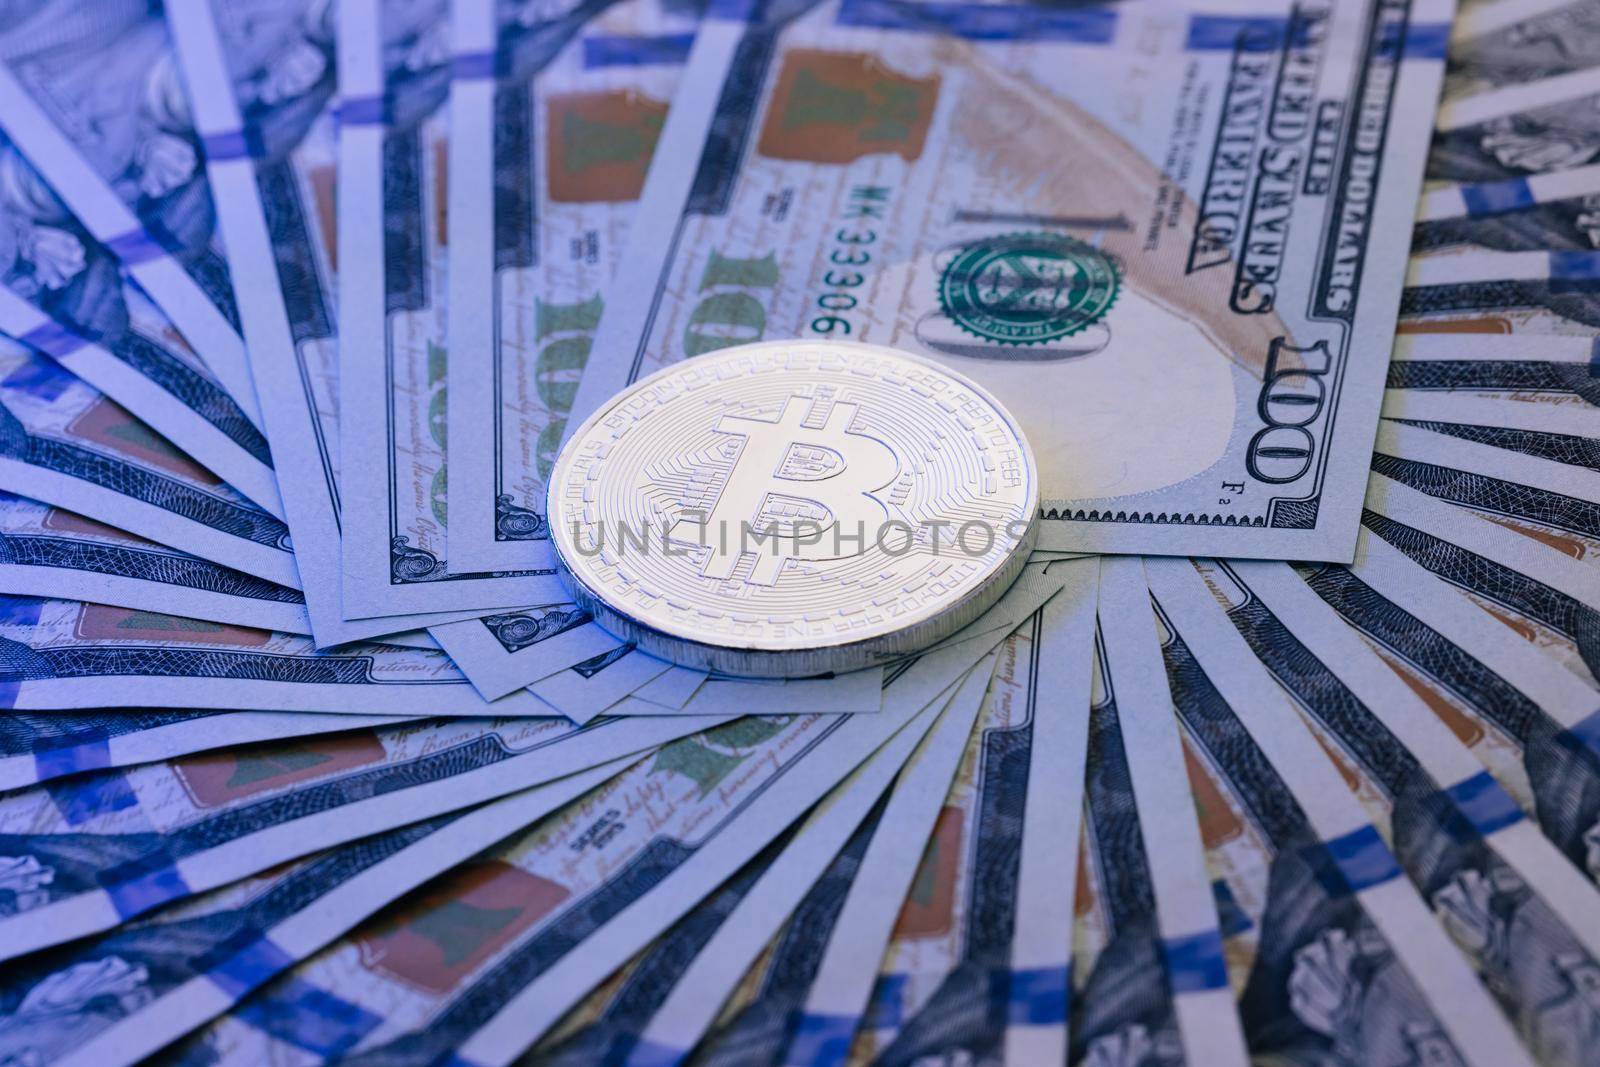 New worldwide virtual internet money with USA banknotes. Bitcoin crypto currency stacked with 100 dollar bills. Diferent physical metal currency over 100 dollar bill of United States.